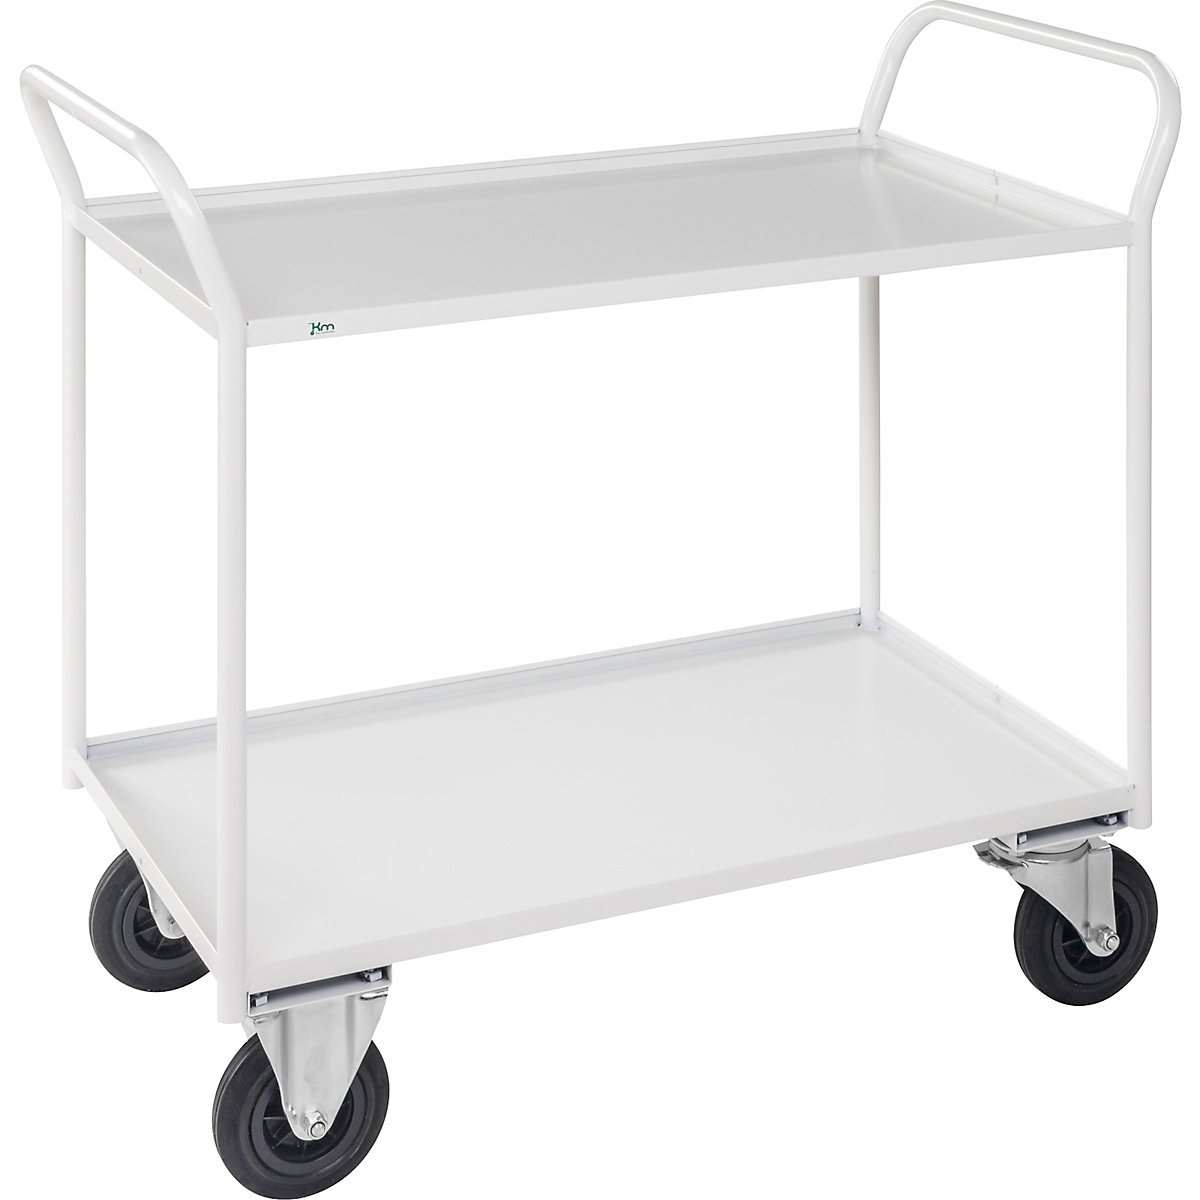 KM41 table trolley – Kongamek, 2 shelves with raised edges, LxWxH 1070 x 550 x 1000 mm, white, 2 swivel castors and 2 fixed castors, 5+ items-5